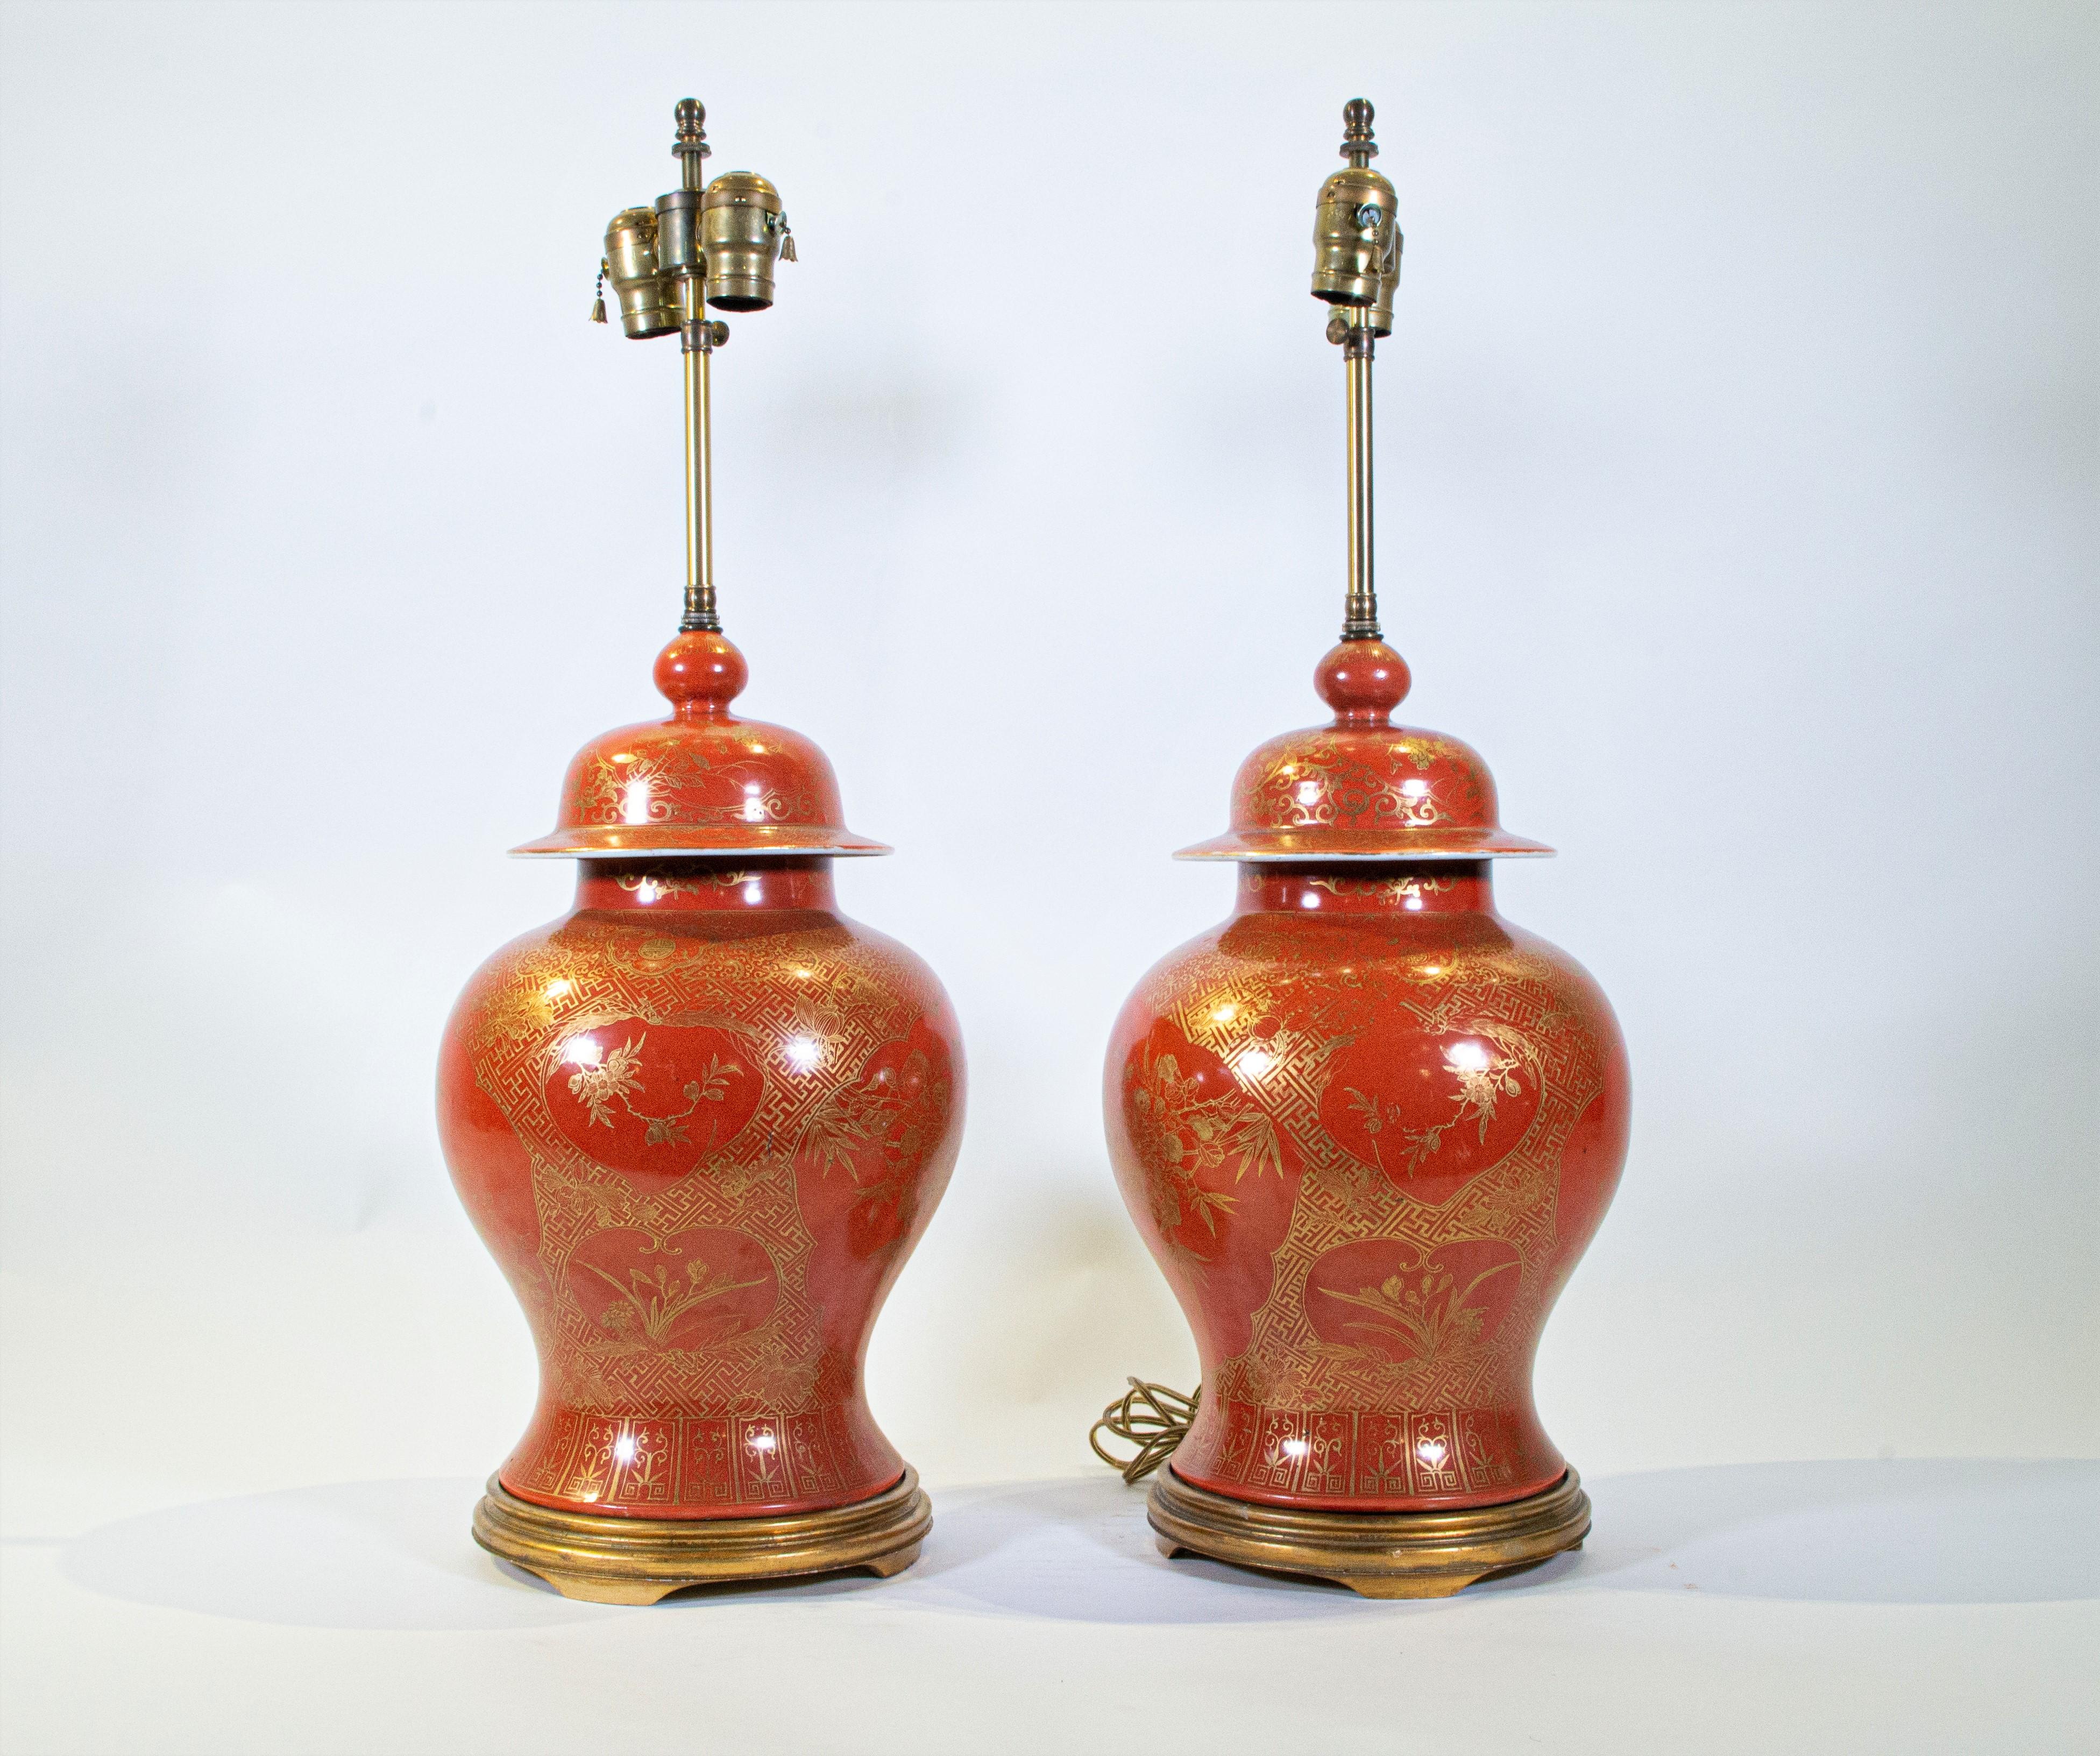 Hand-Painted Fine pair Antique Chinese Export Orange Ground & 24K Gilt Vases Turned to Lamps For Sale